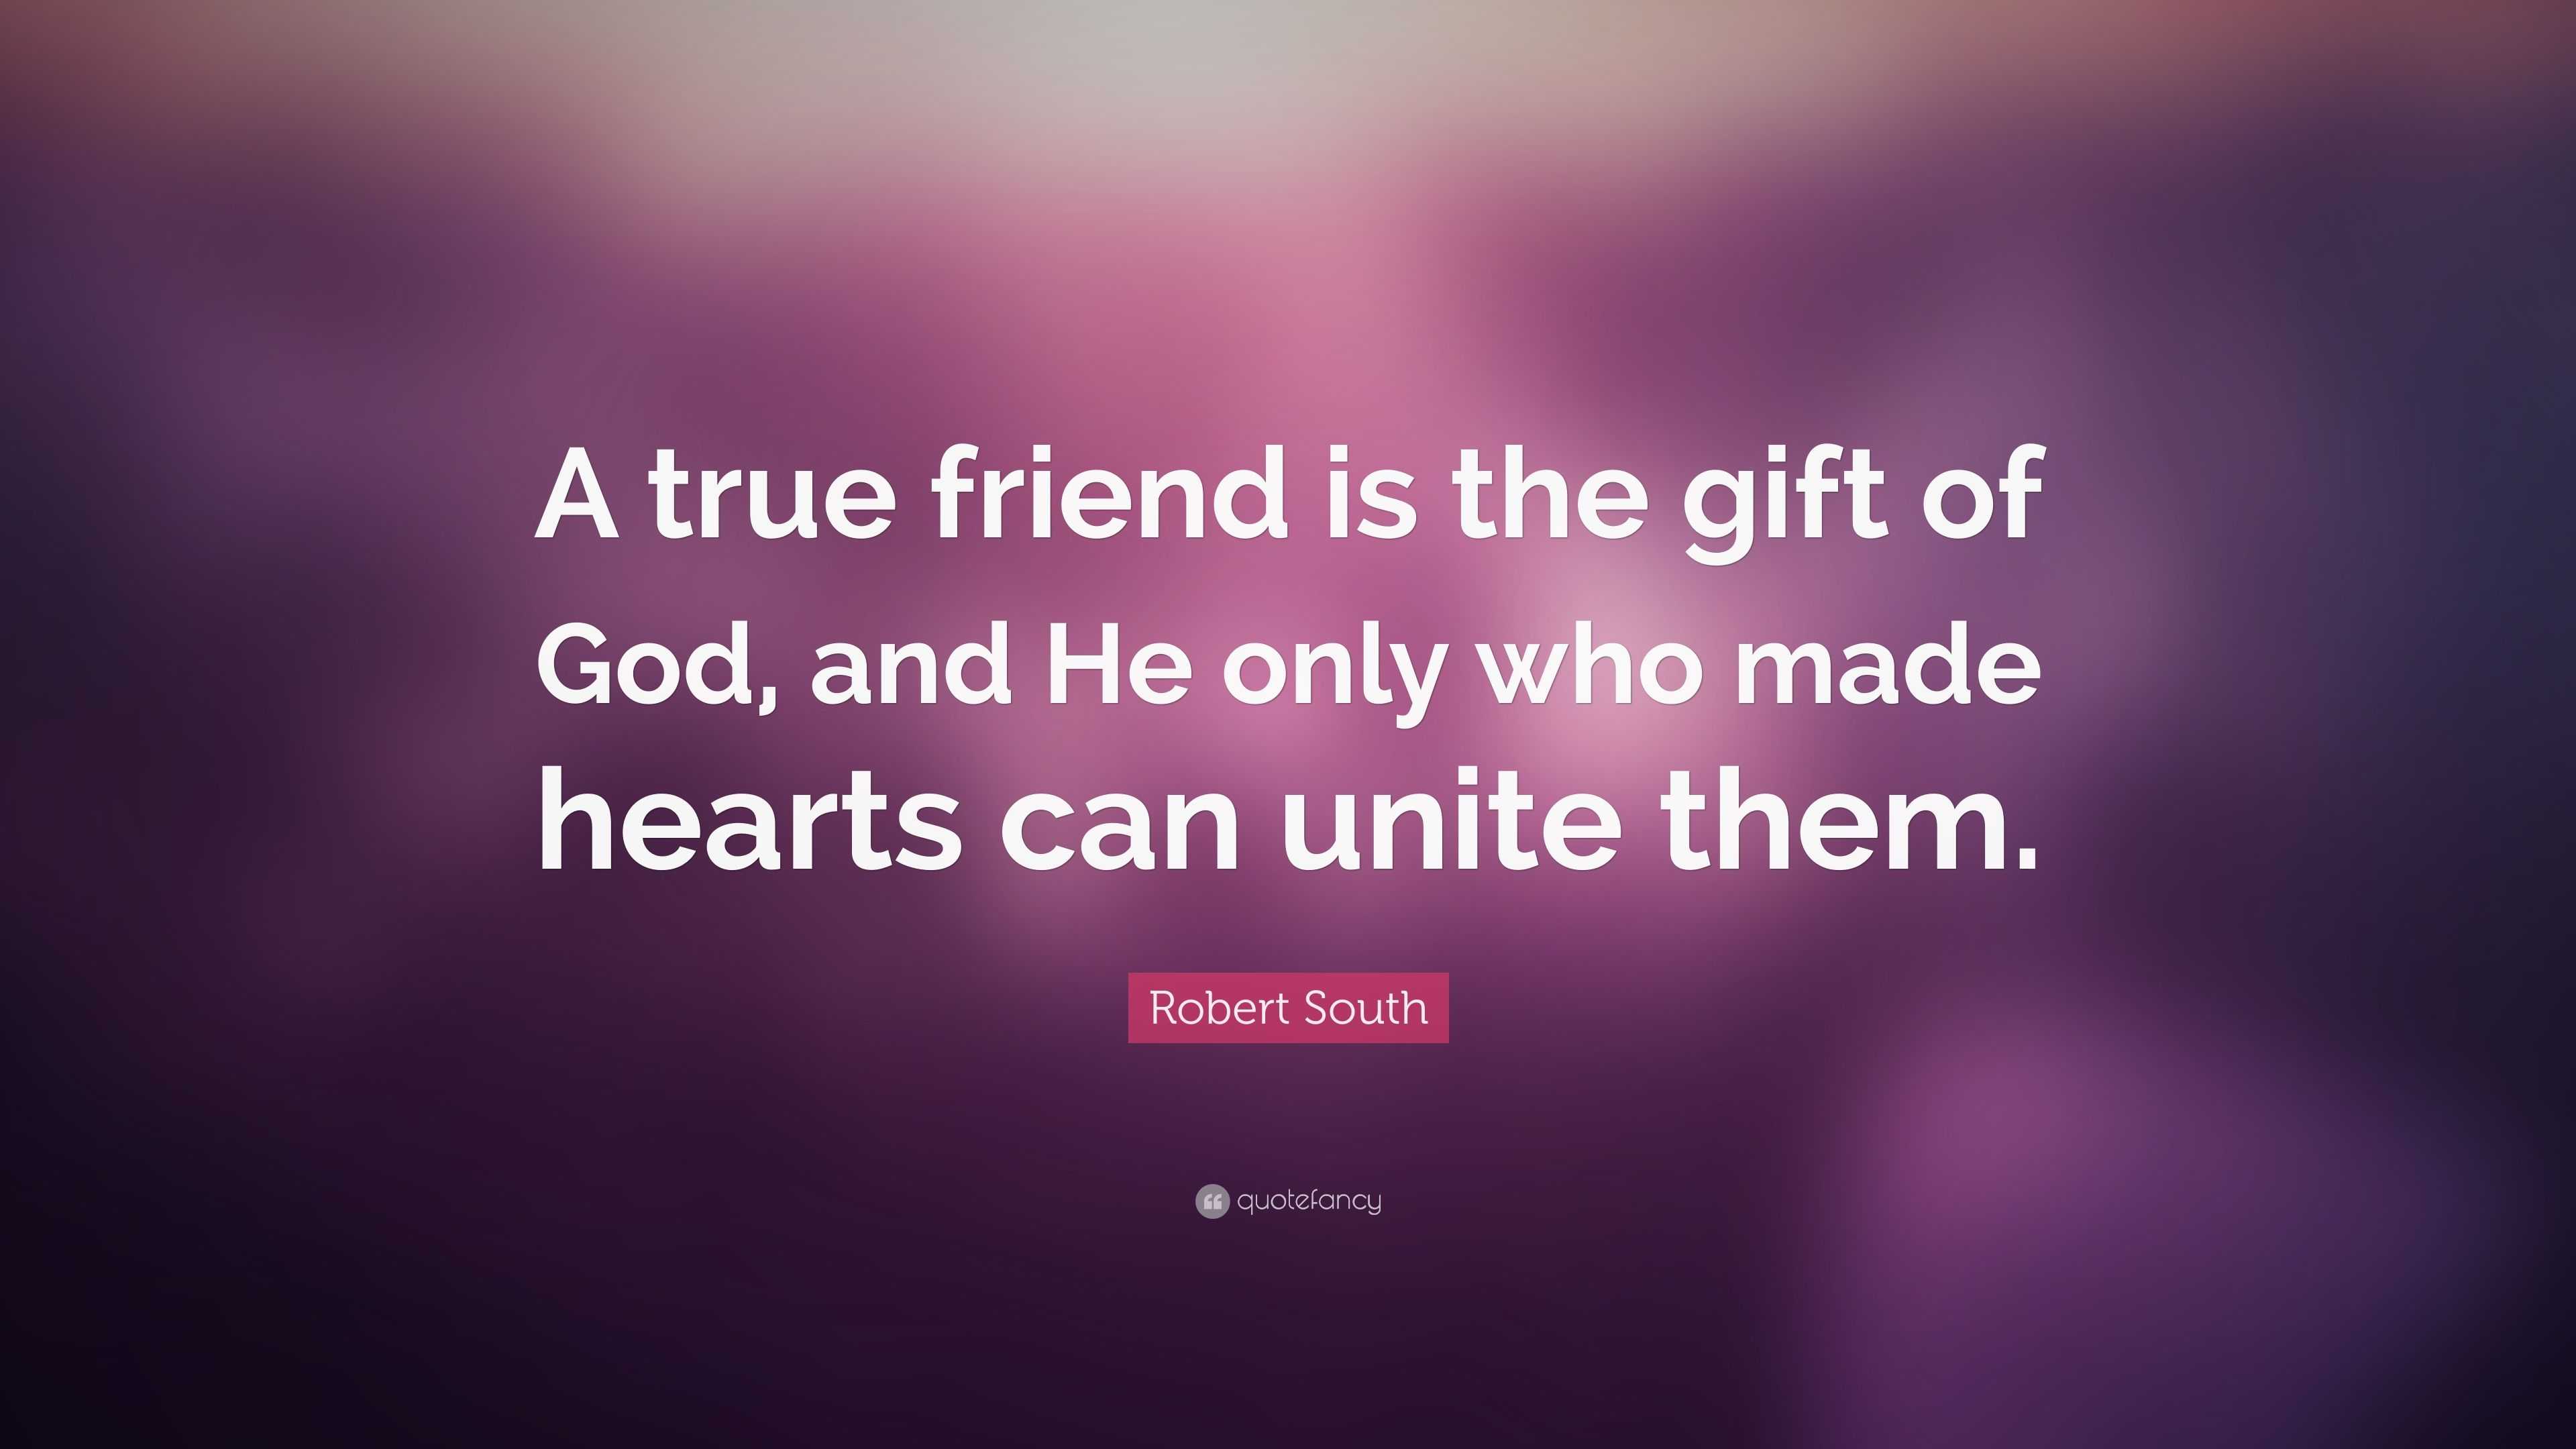 4782955 Robert South Quote A true friend is the gift of God and He only